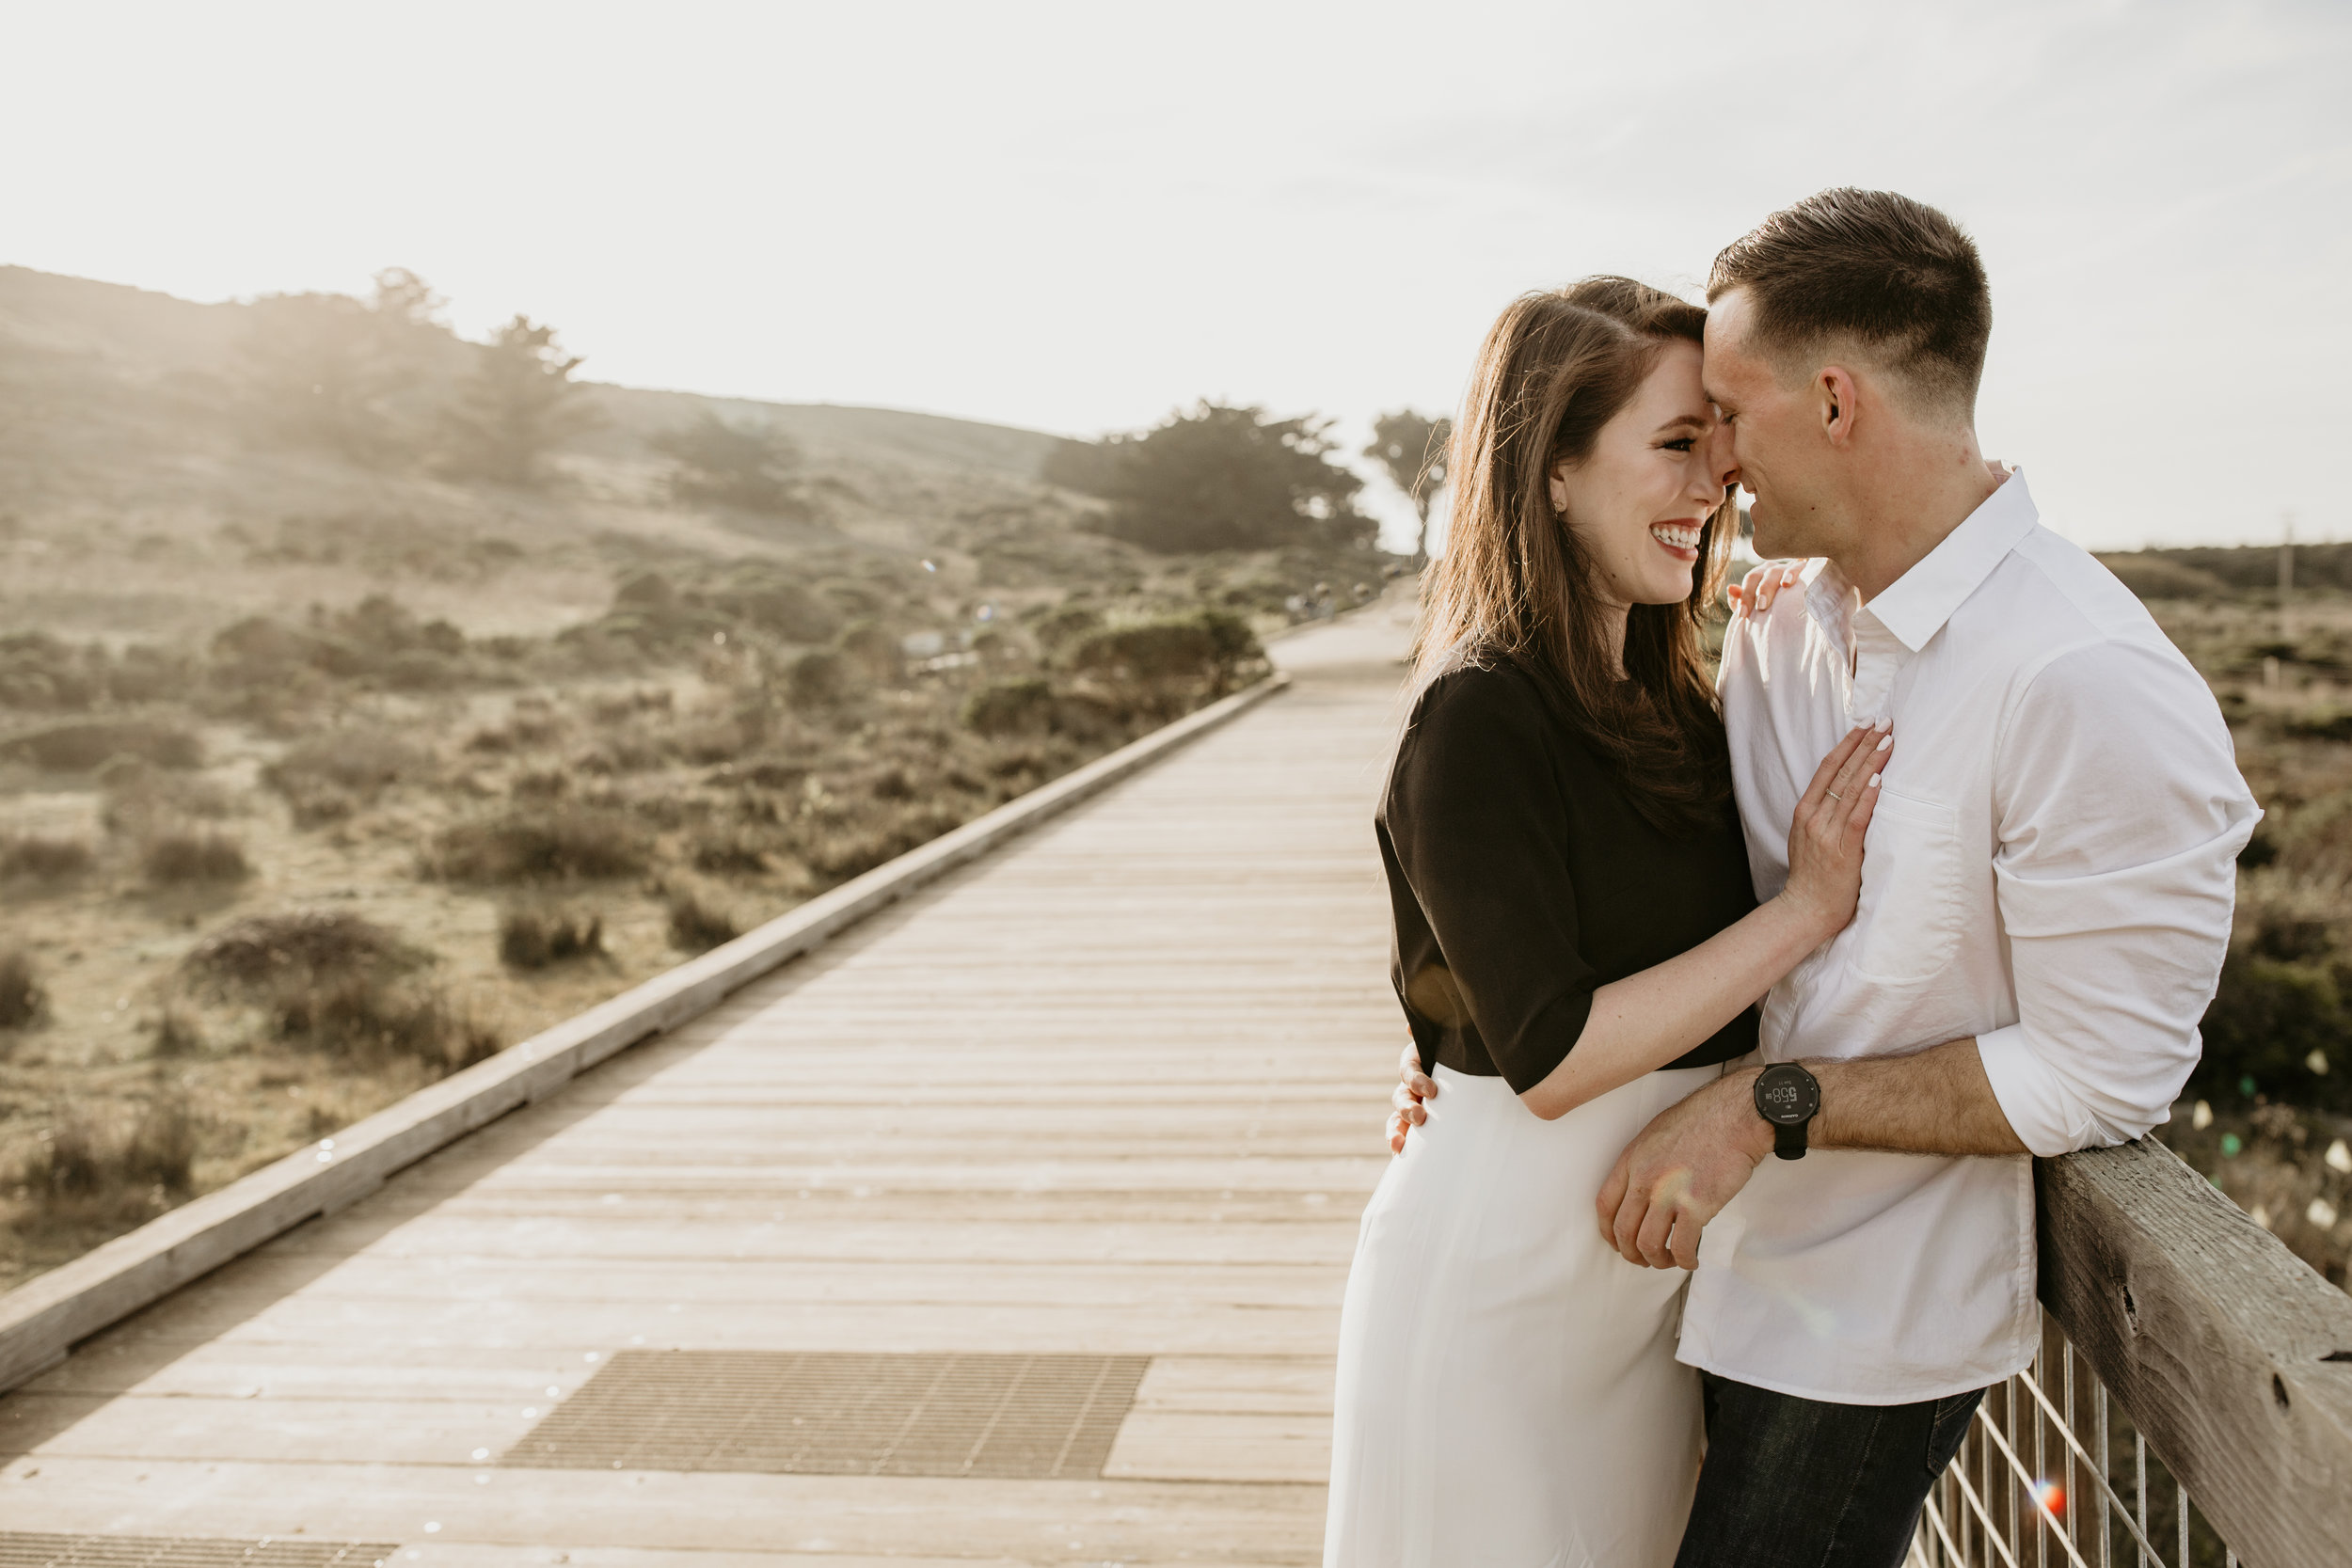 san francisco engagement + wedding photography by bre thurston | outside lifestyle photographer in the bay area | romantic engaged couple on the beach at sunset